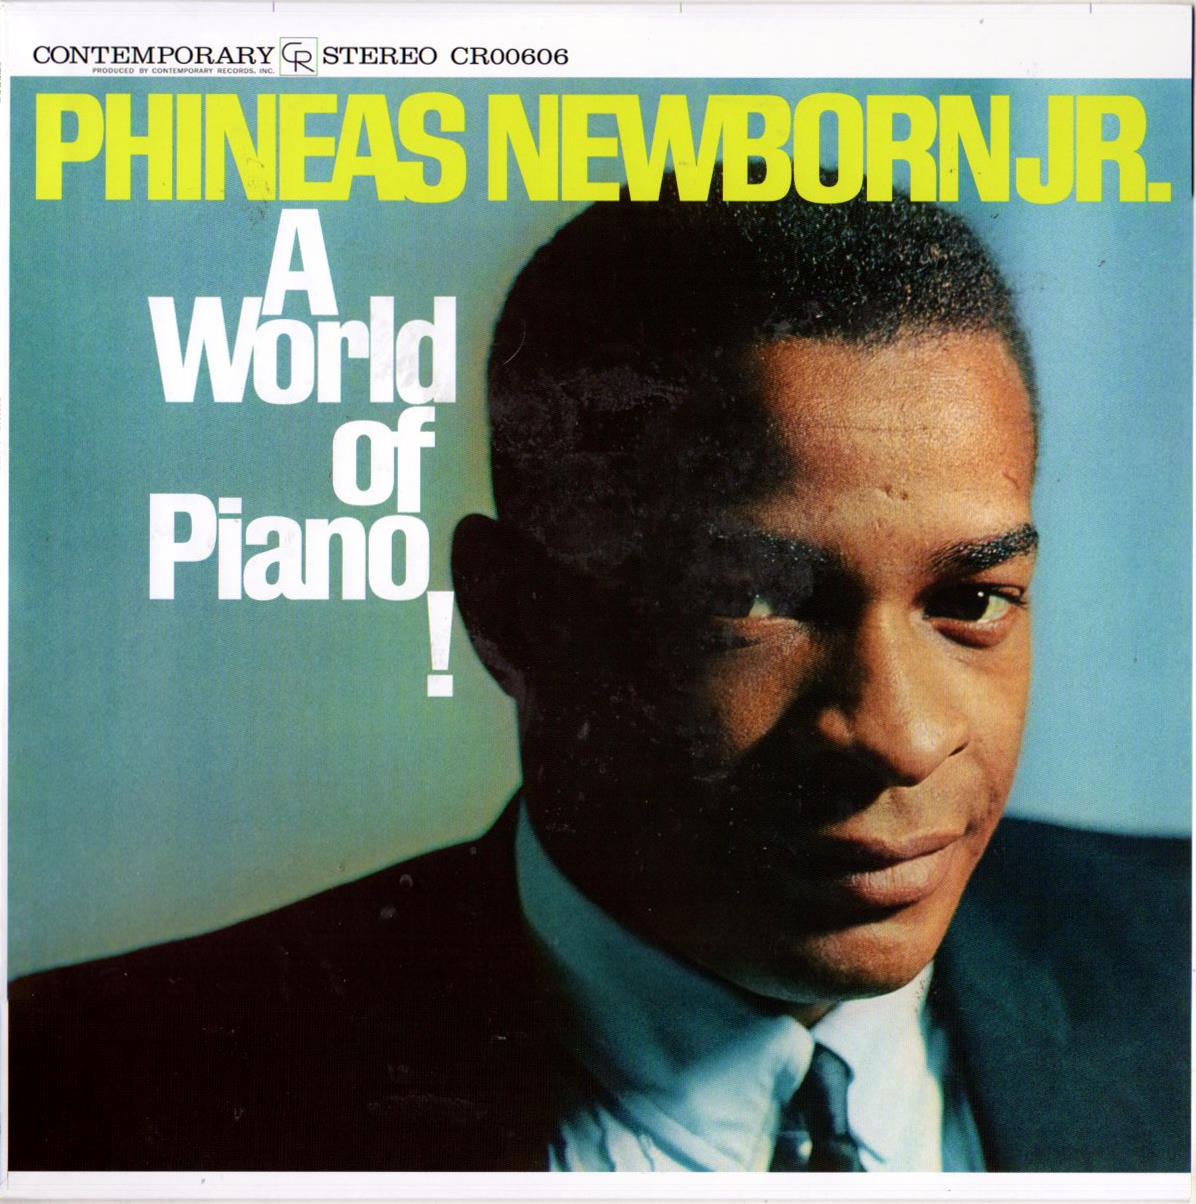 Phineas Newborn Jr. "A World of Piano!"